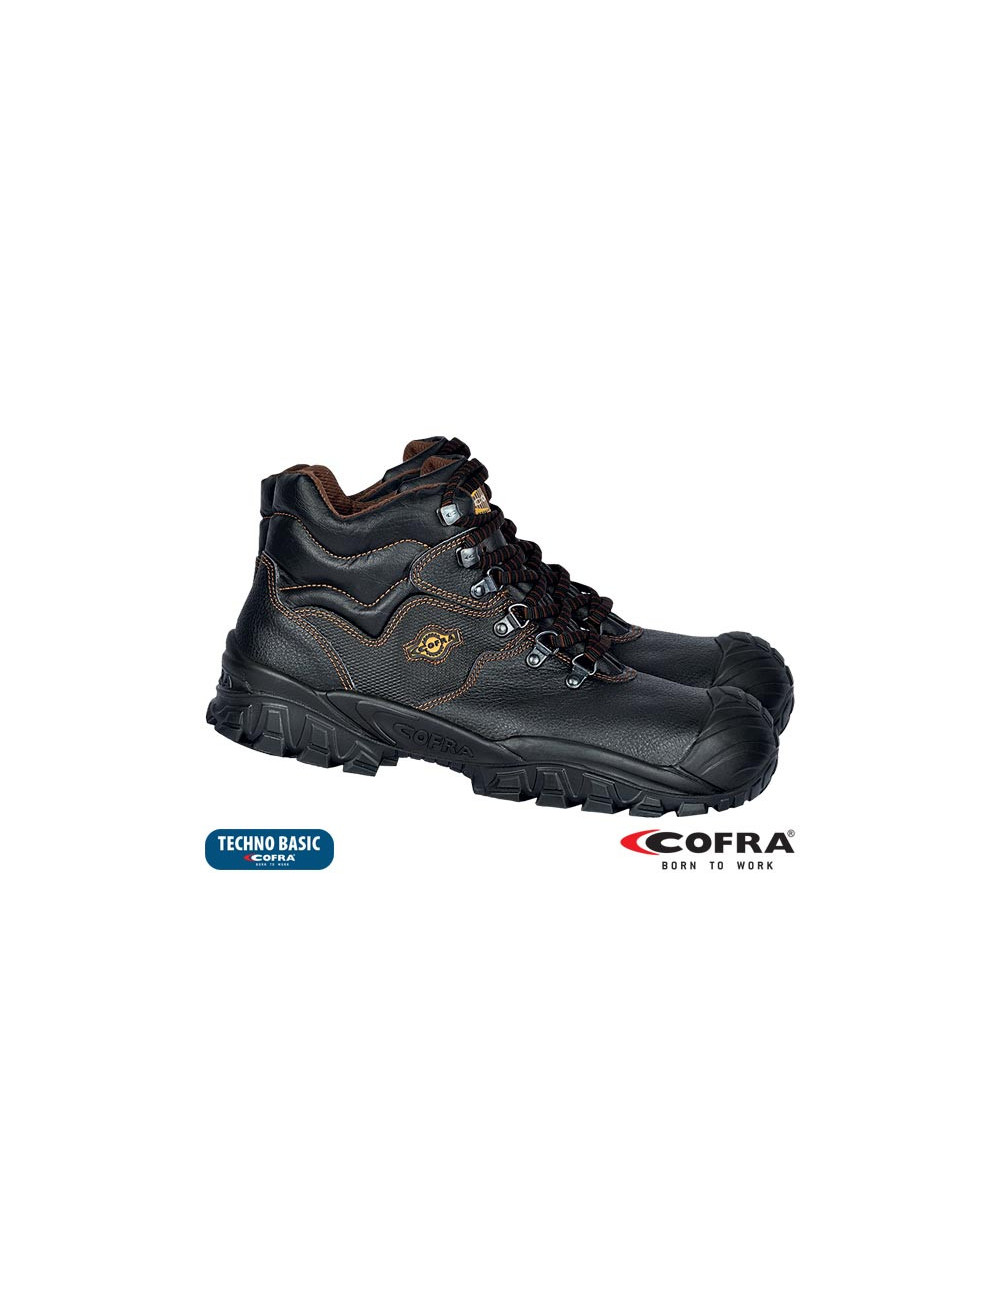 Brc-reno safety shoes Cofra